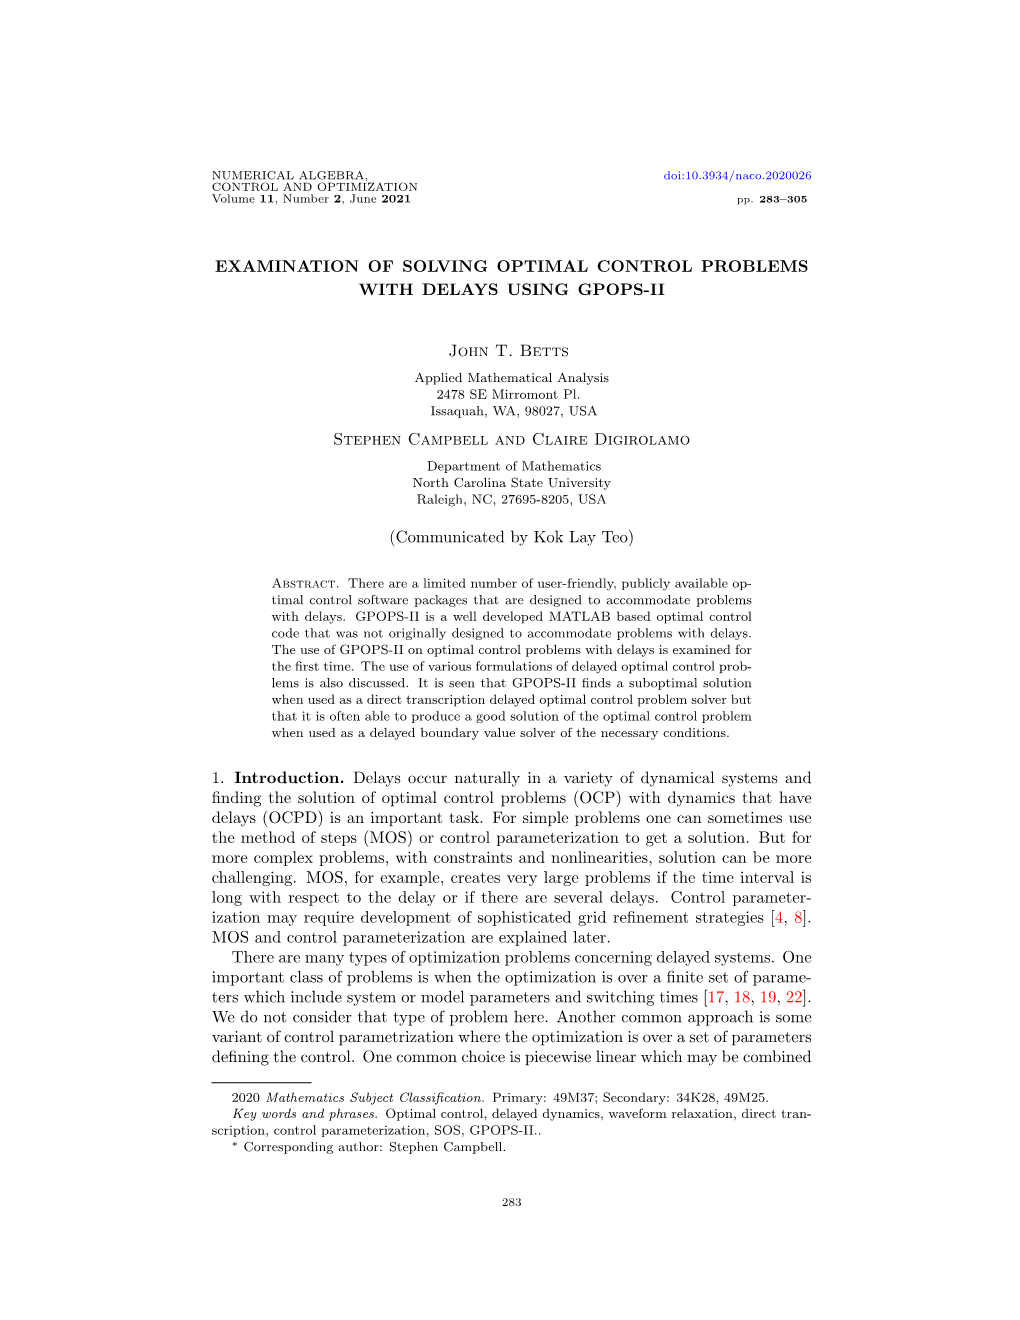 EXAMINATION of SOLVING OPTIMAL CONTROL PROBLEMS with DELAYS USING GPOPS-II John T. Betts Stephen Campbell and Claire Digirolamo